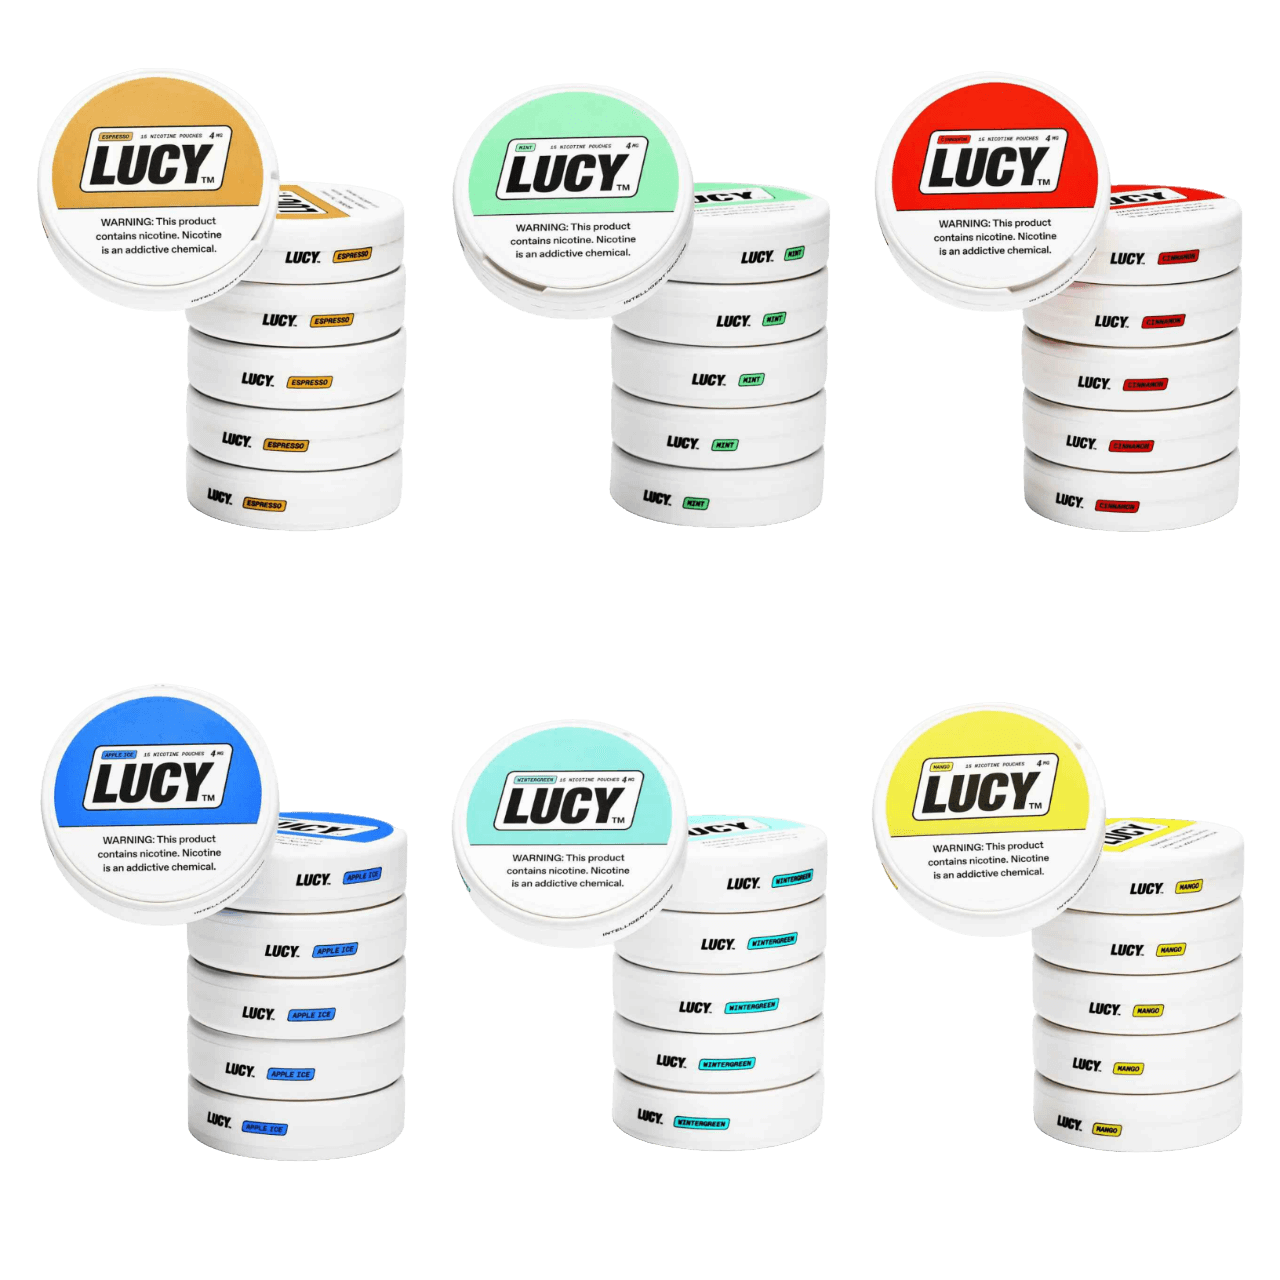 Lucy Nicotine Pouches 15ct - 5PK